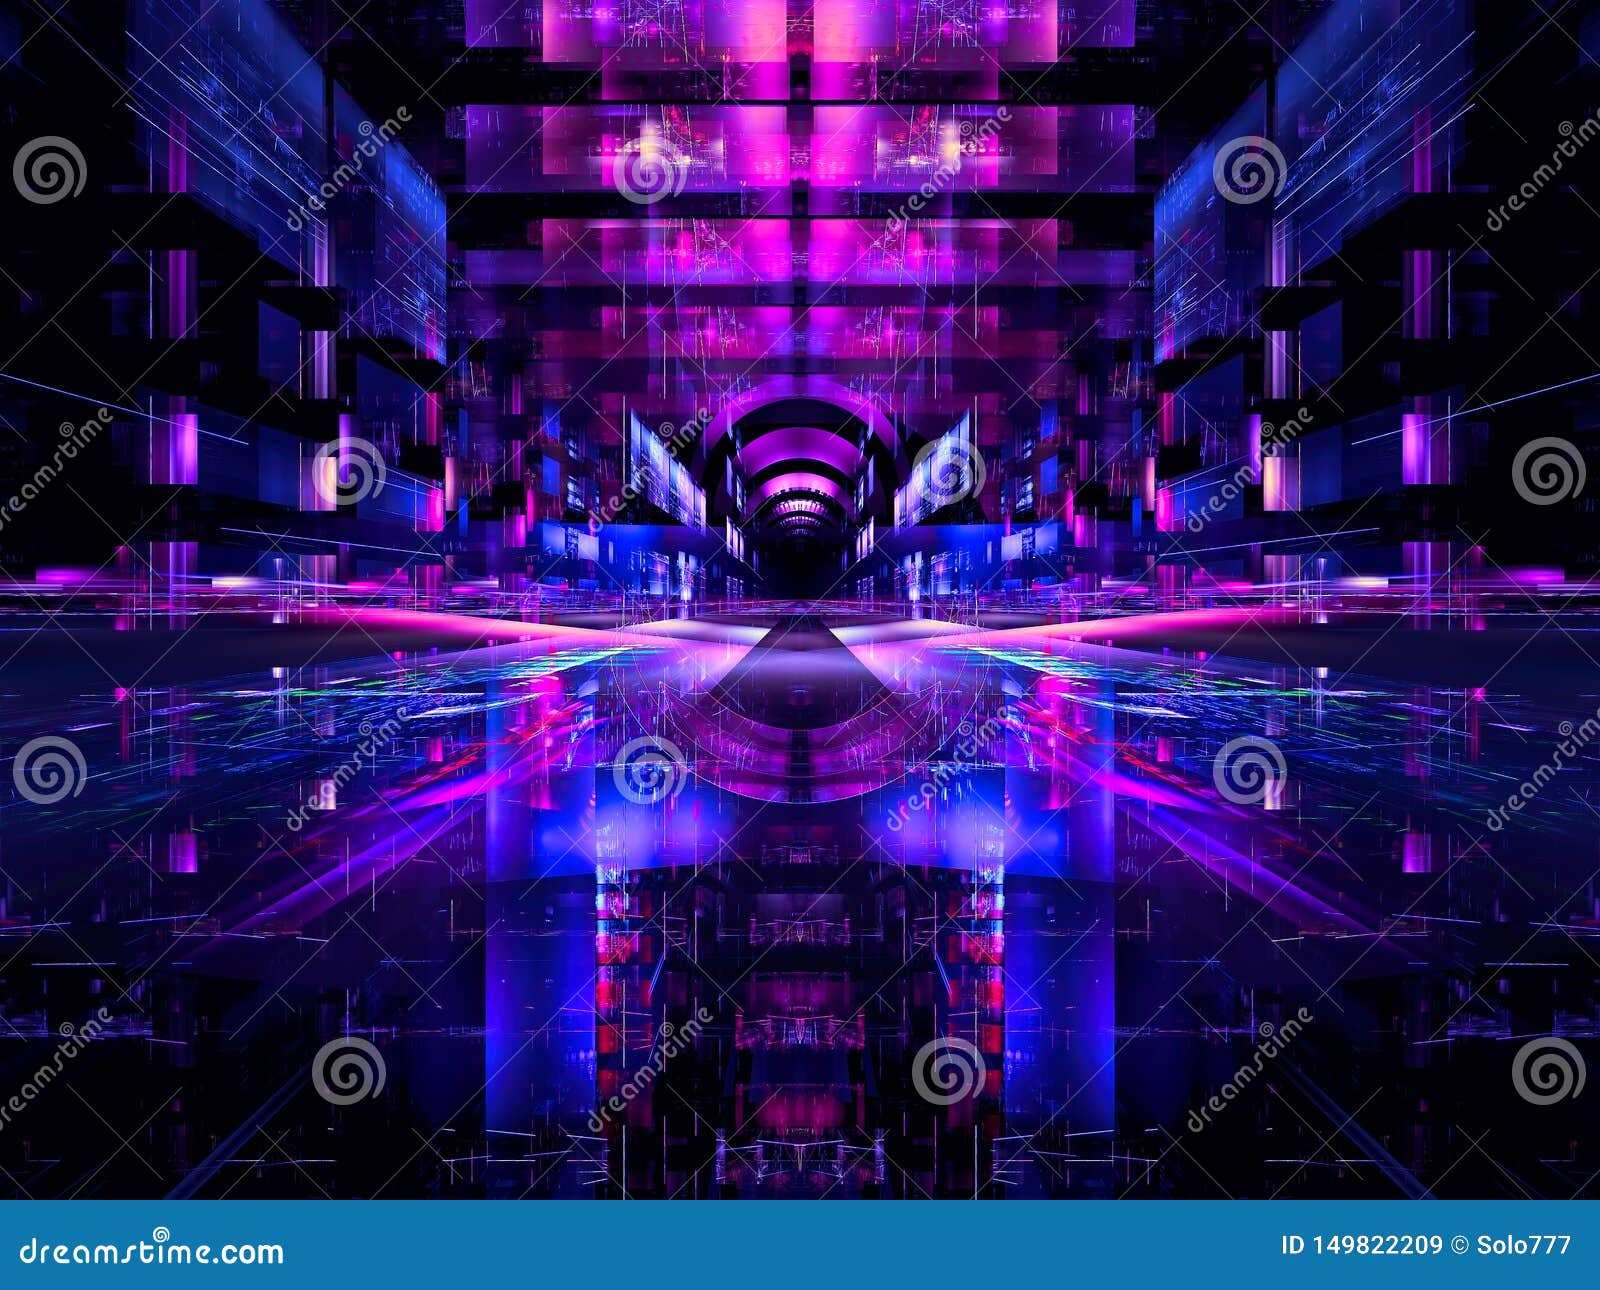 Virtual Reality Background - Abstract Digitally Generated Image Stock  Illustration - Illustration of cyberspace, pattern: 149822209